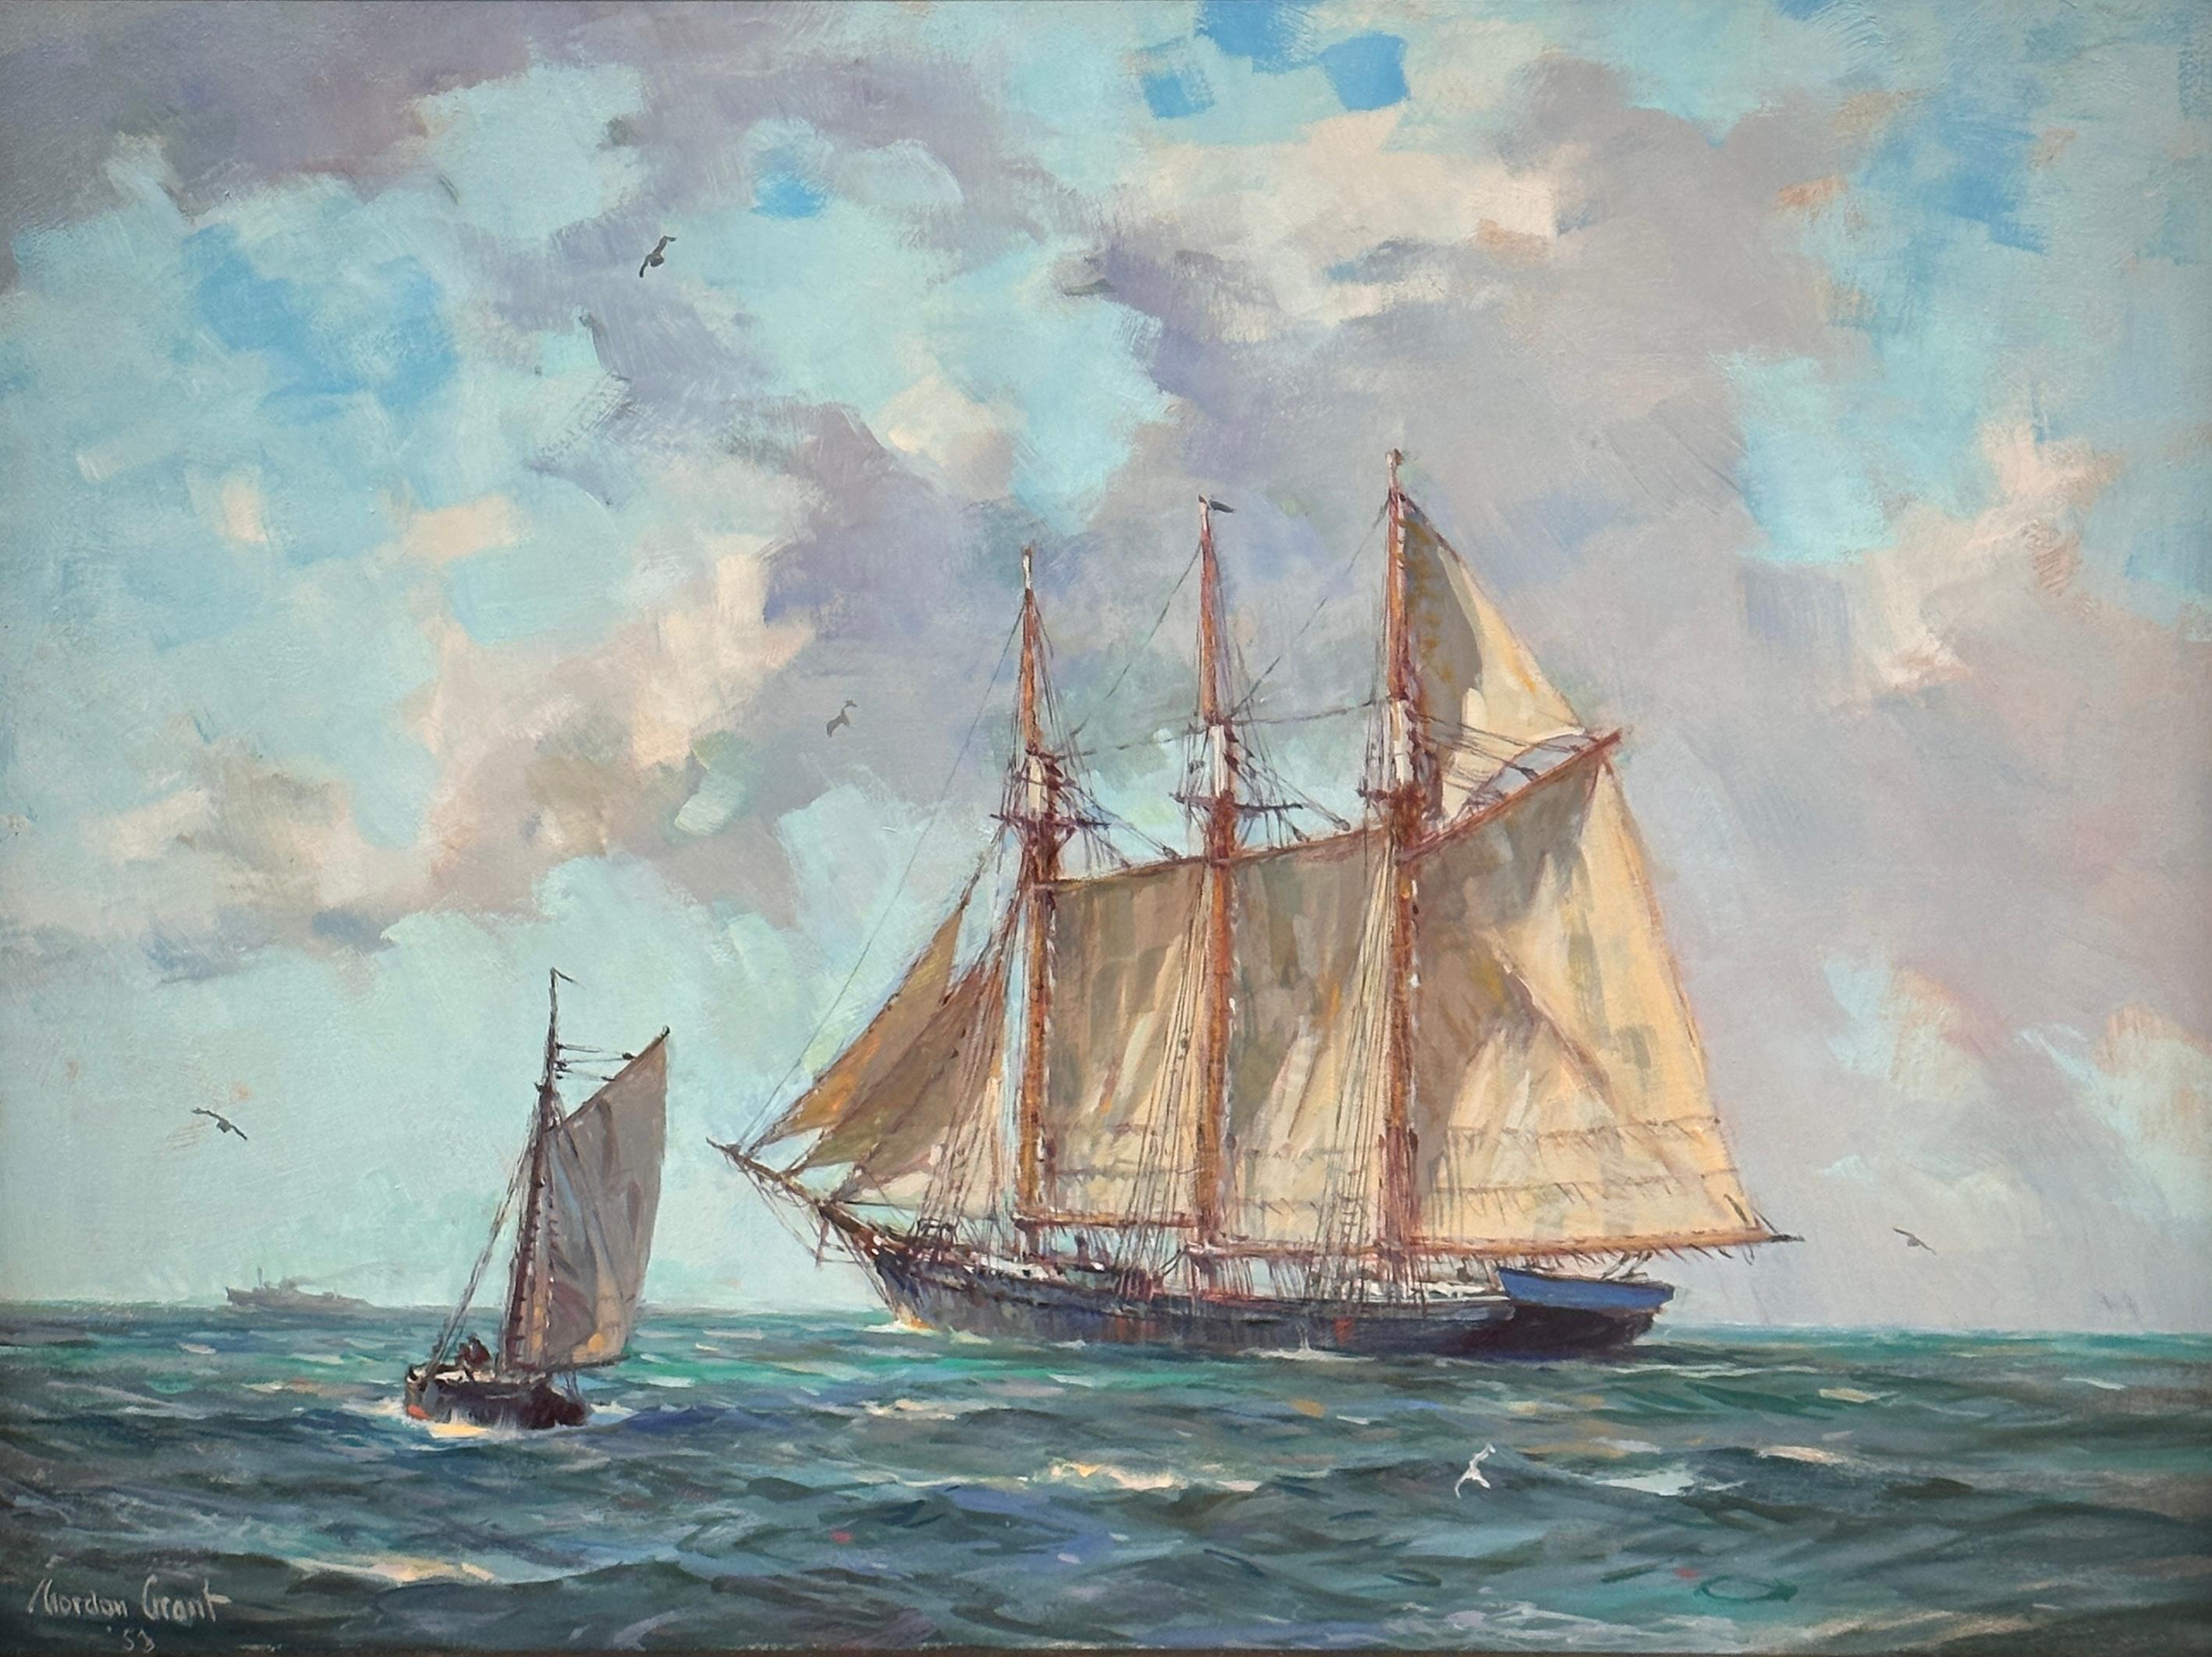 Fore and Aft, marine seascape painting from 1950s with three masted schooner  - Painting by Gordon Grant